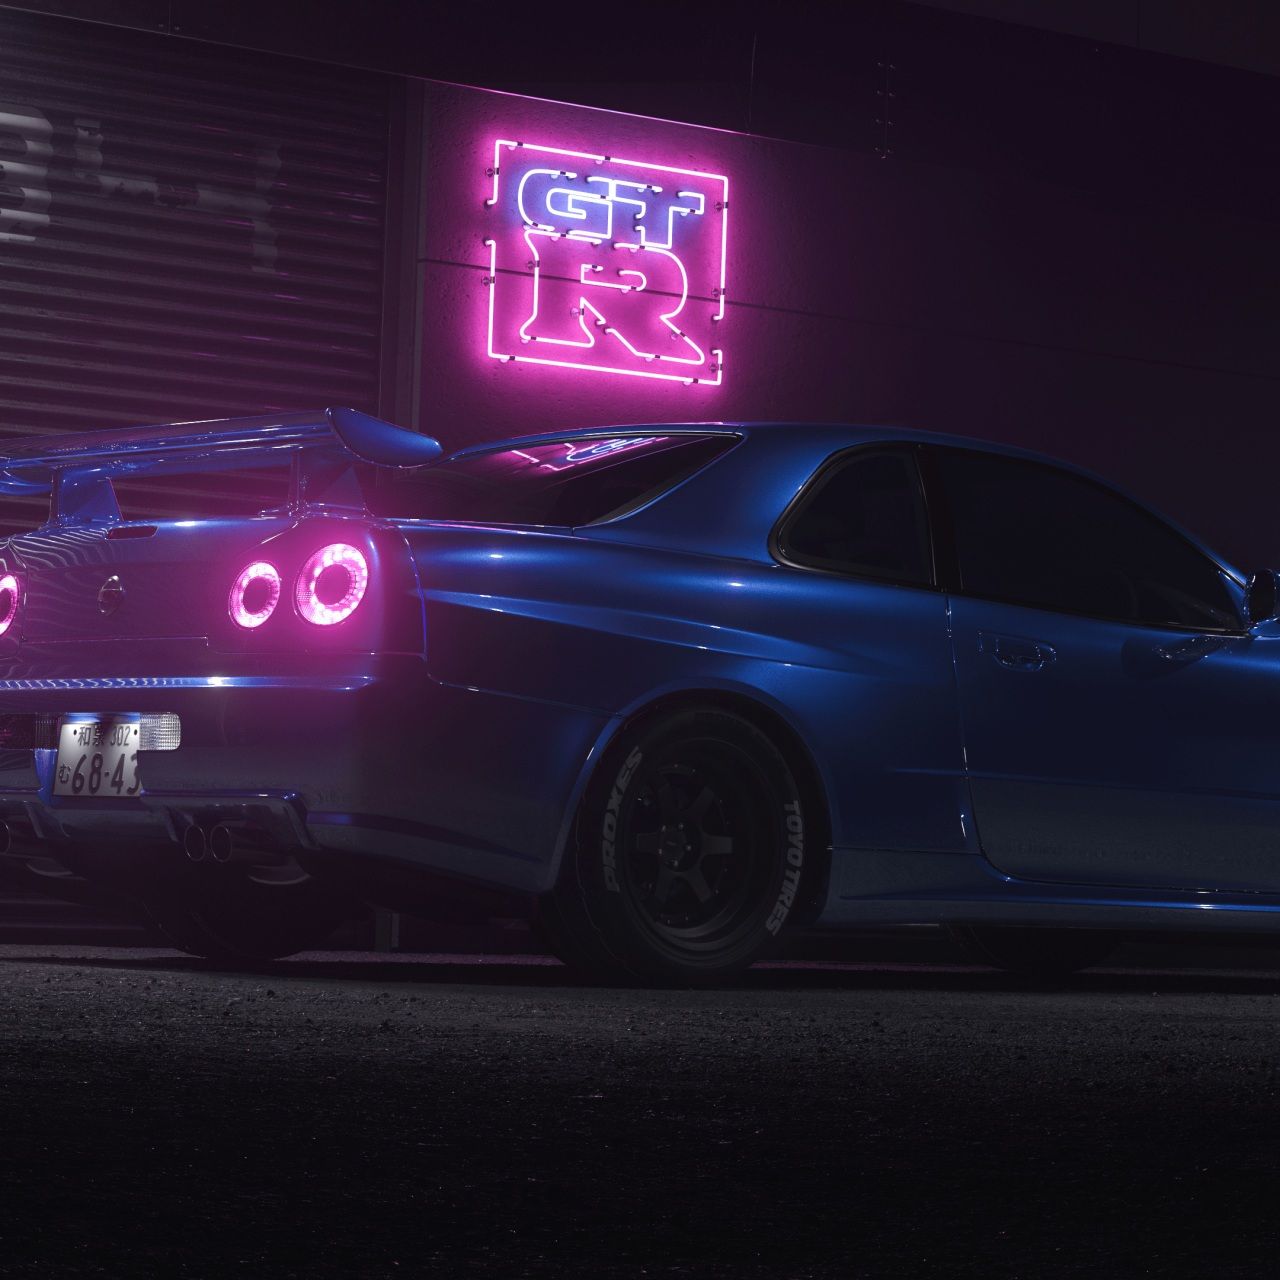 A Nissan GTR R34 in blue with pink neon lights in the background - Nissan Skyline